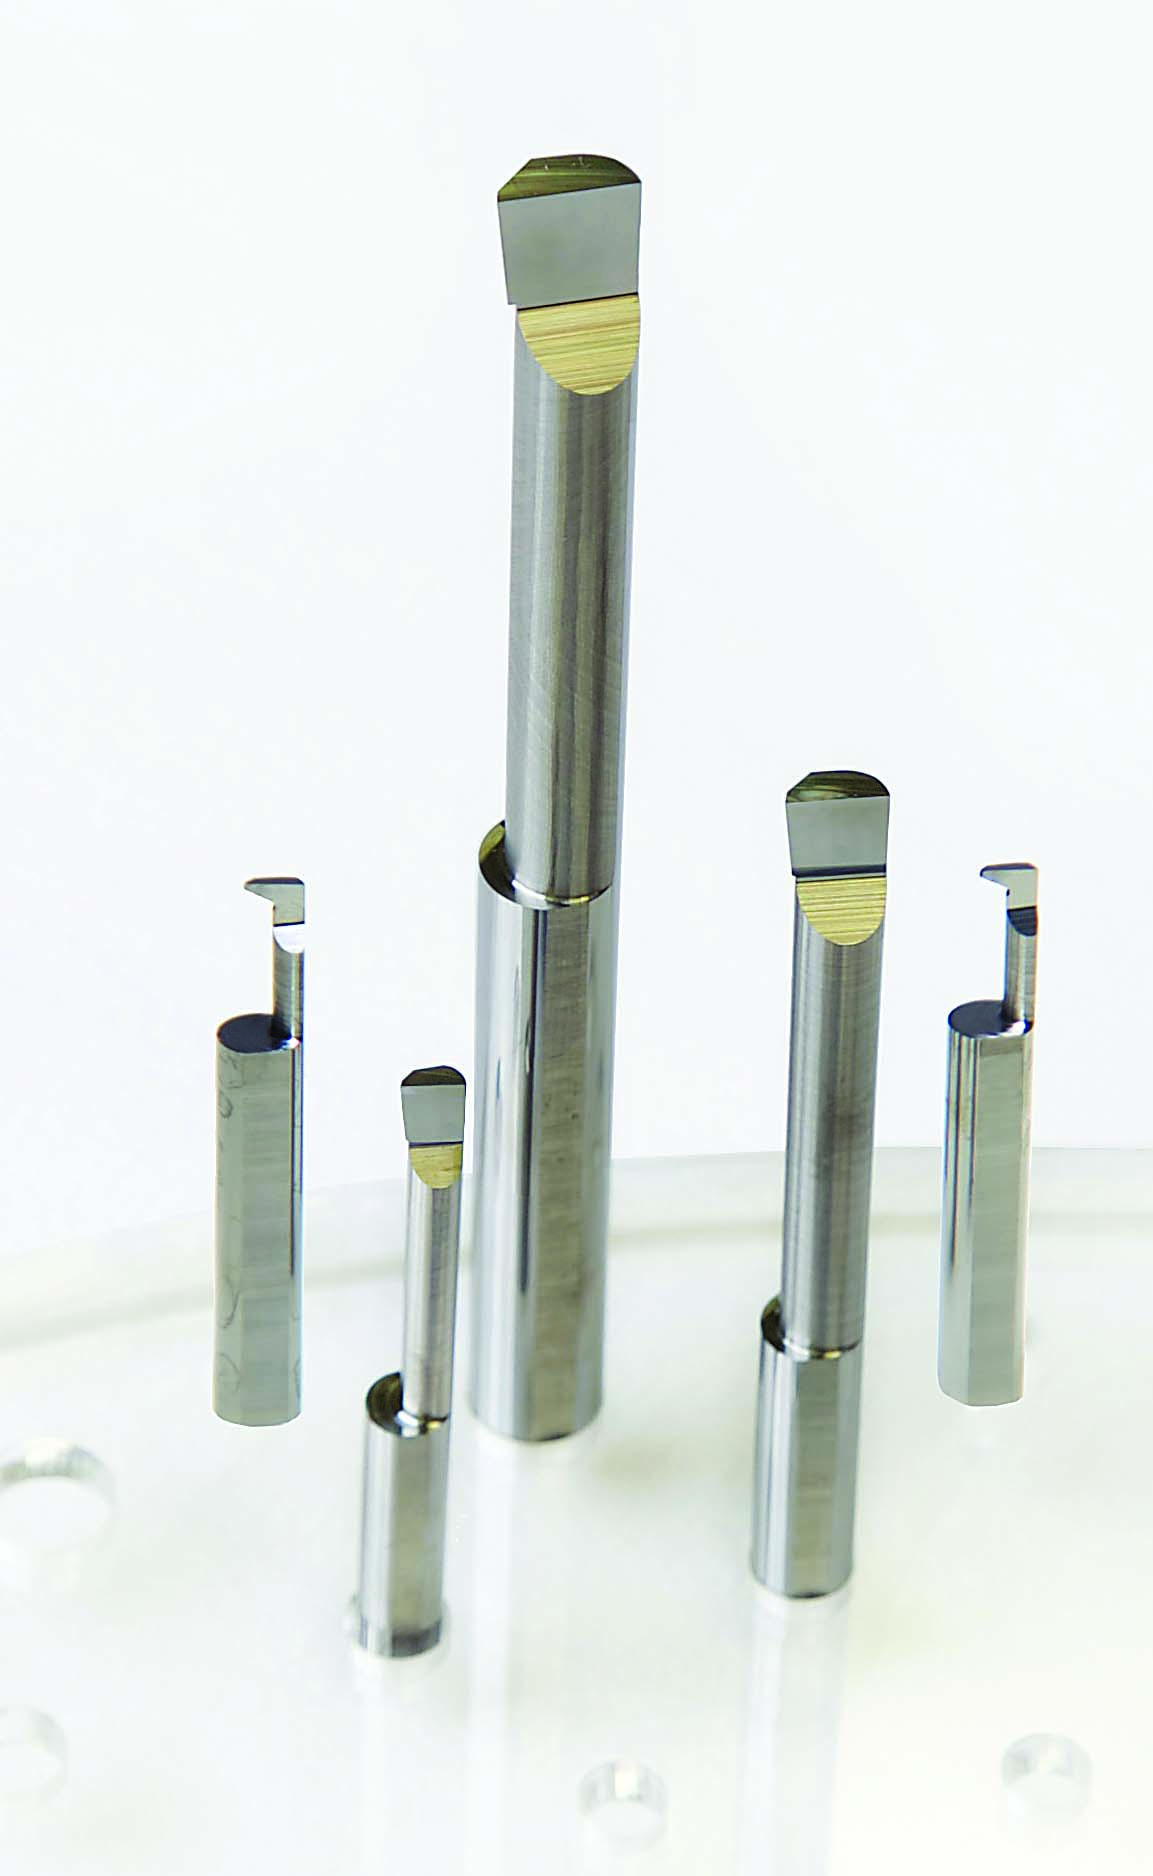 Scientific Cutting Tools Solid-carbide boring bars come in a range of sizes for different applications.